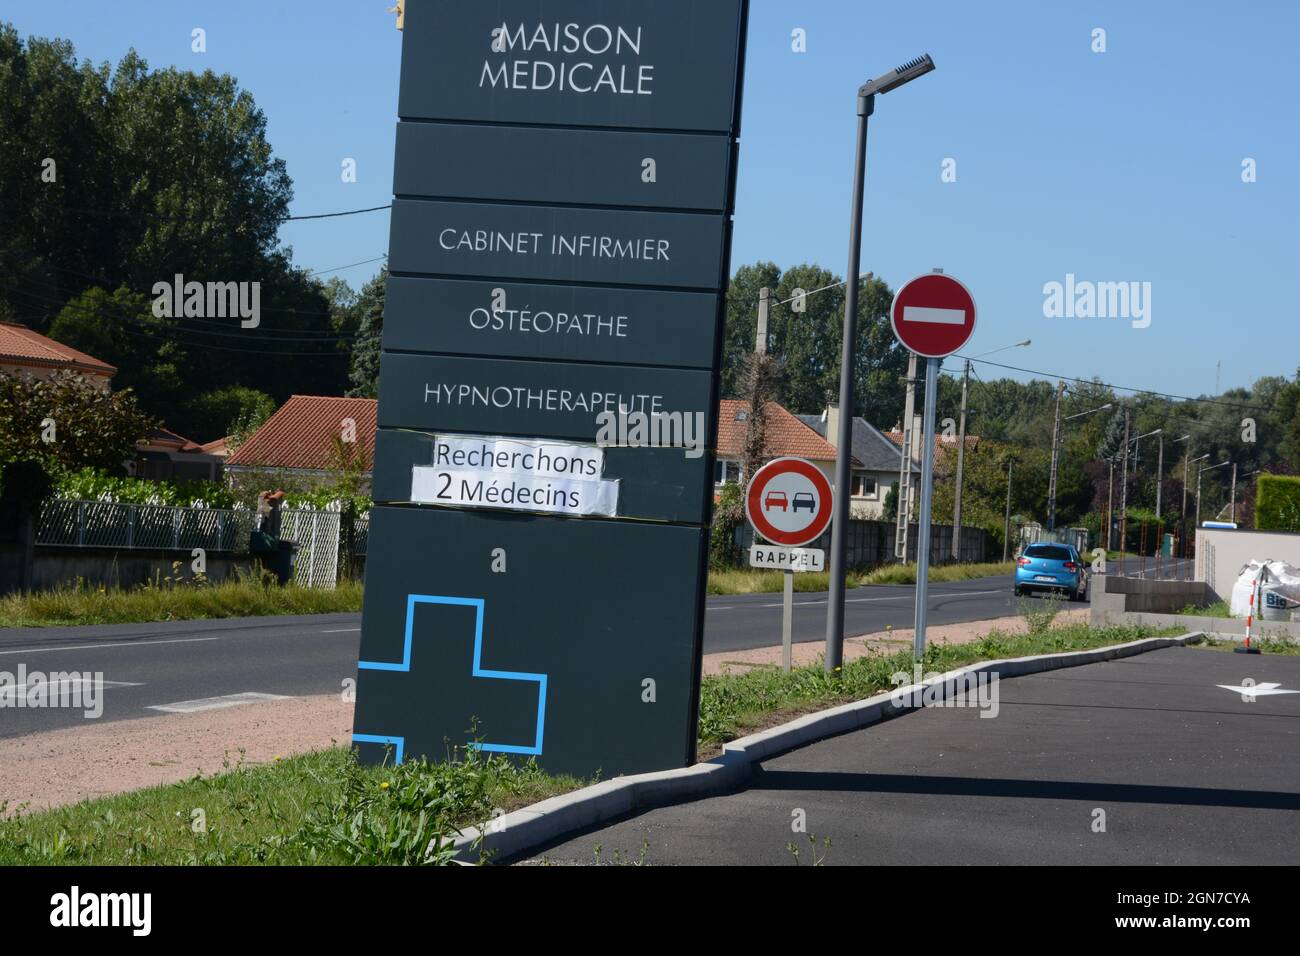 sign of a medical house looking for doctors at the entry of rural village in Auvergne-Rhone-Alpes region, Puy-de-Dome, France Stock Photo